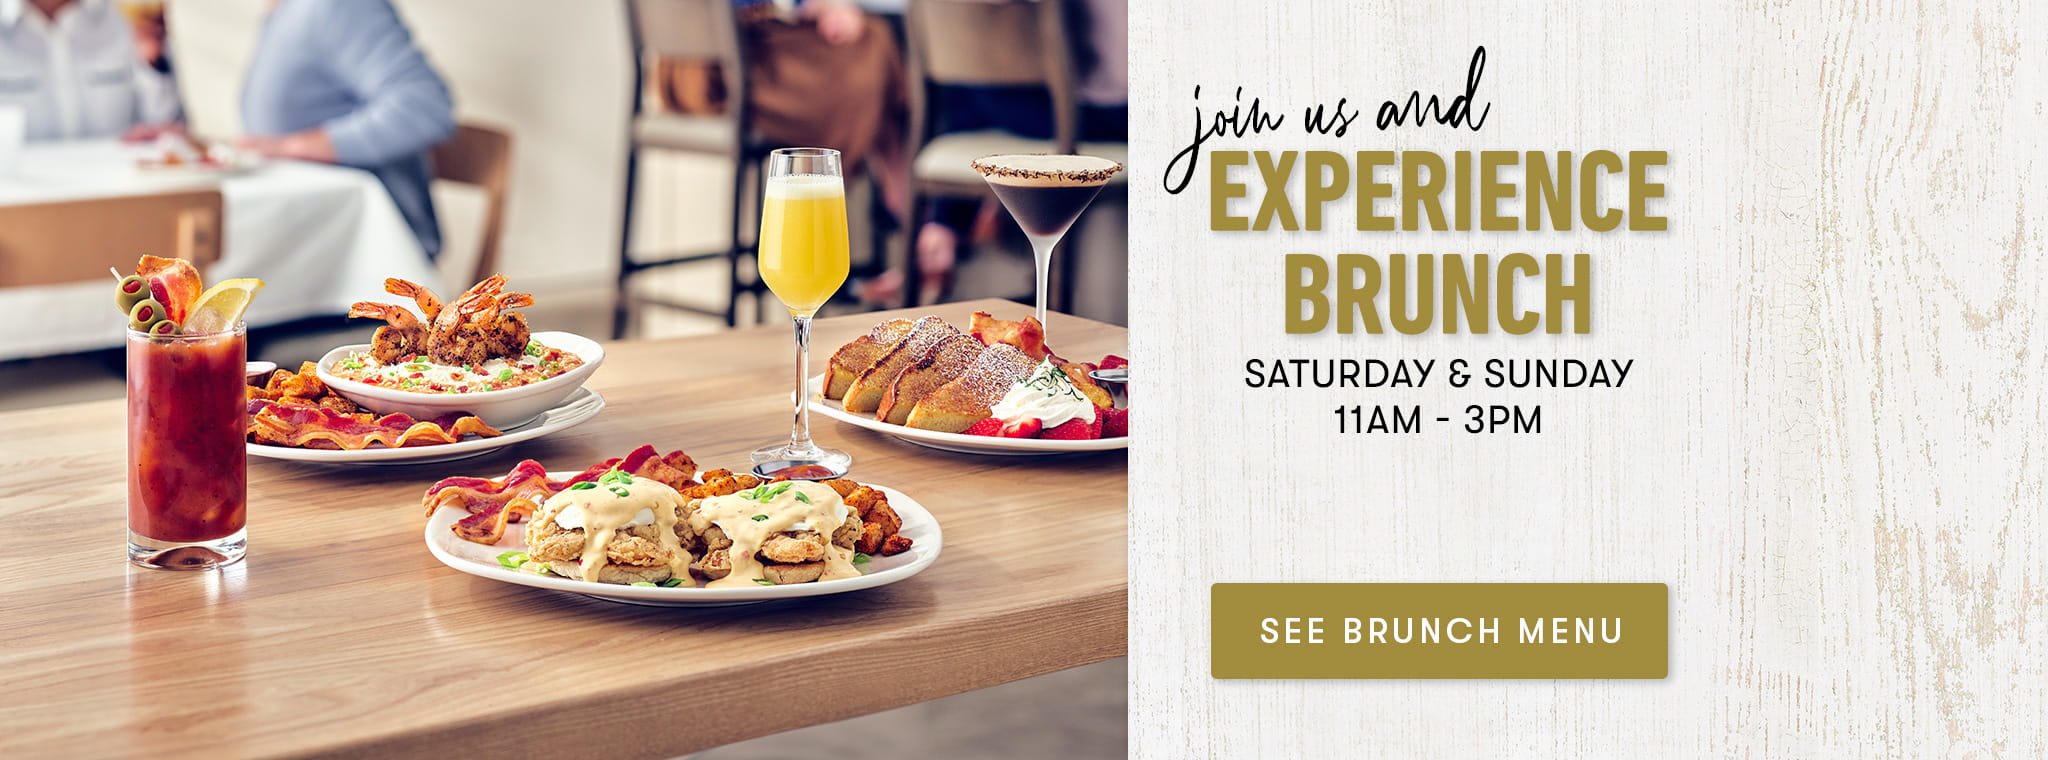 Join us and experience BRUNCH Saturday and Sunday 11am-3pm